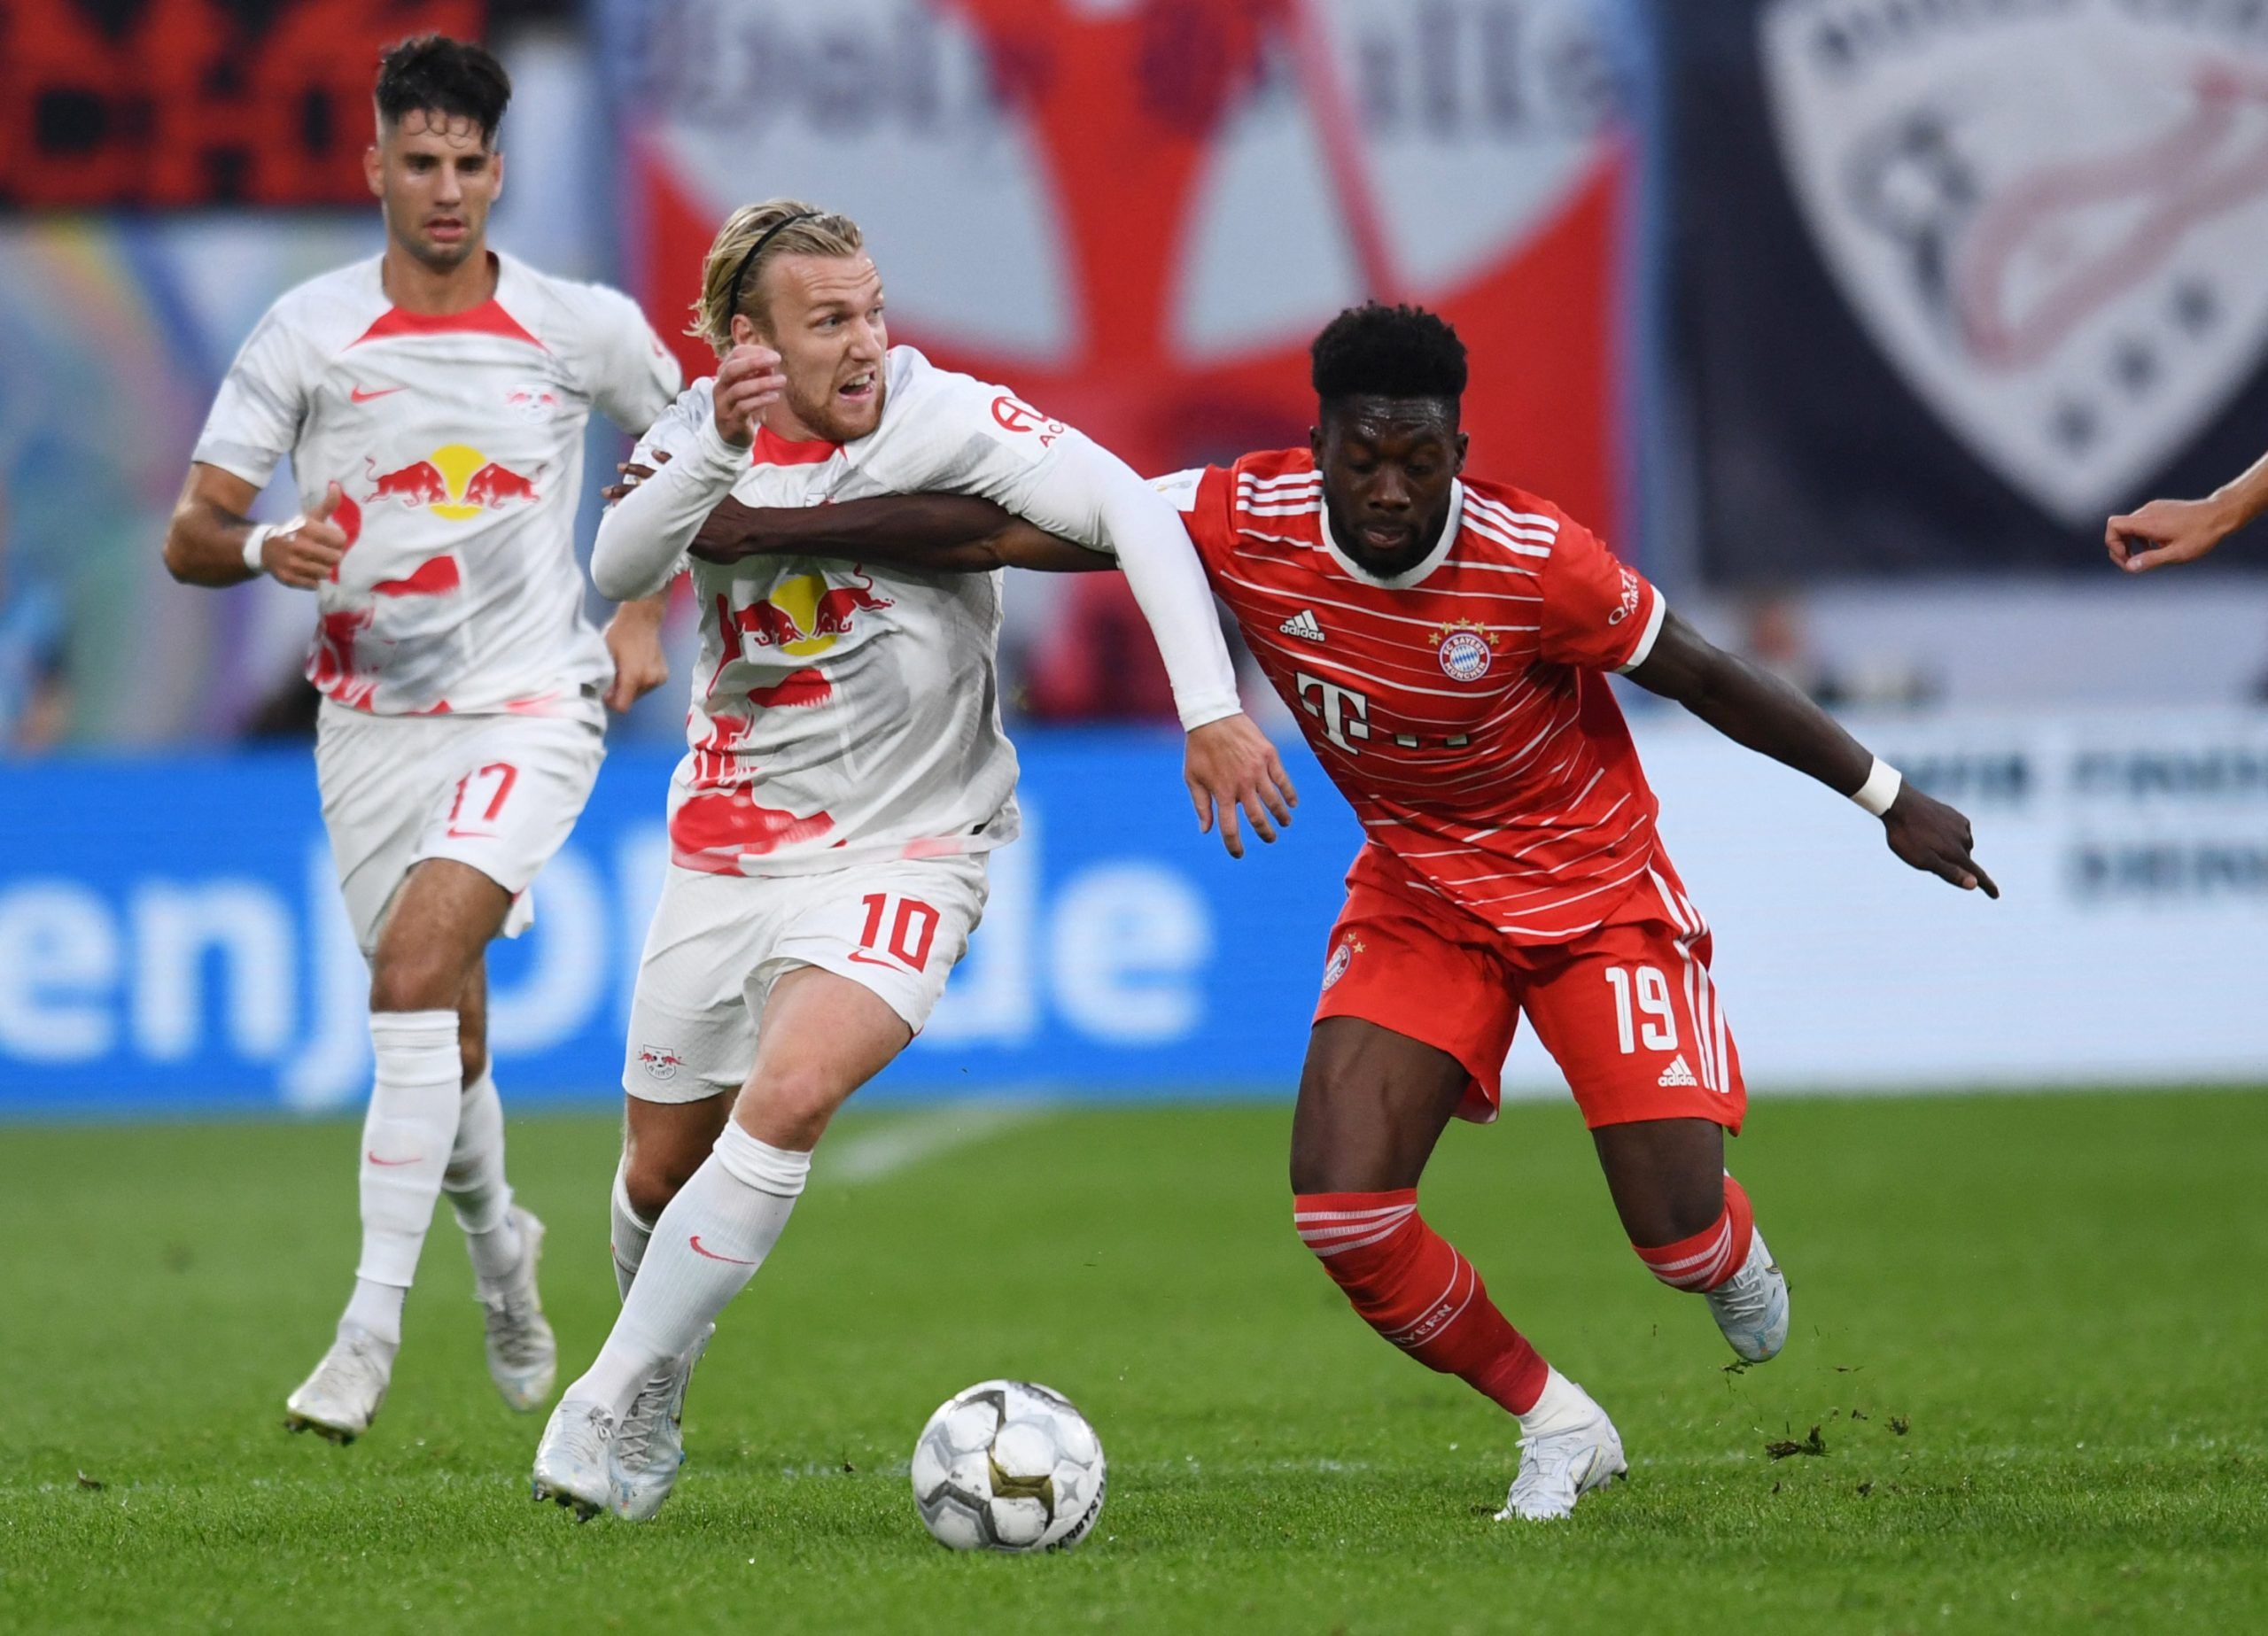 RB Leipzig's Emil Forsberg in action with Bayern Munich's Alphonso Davies